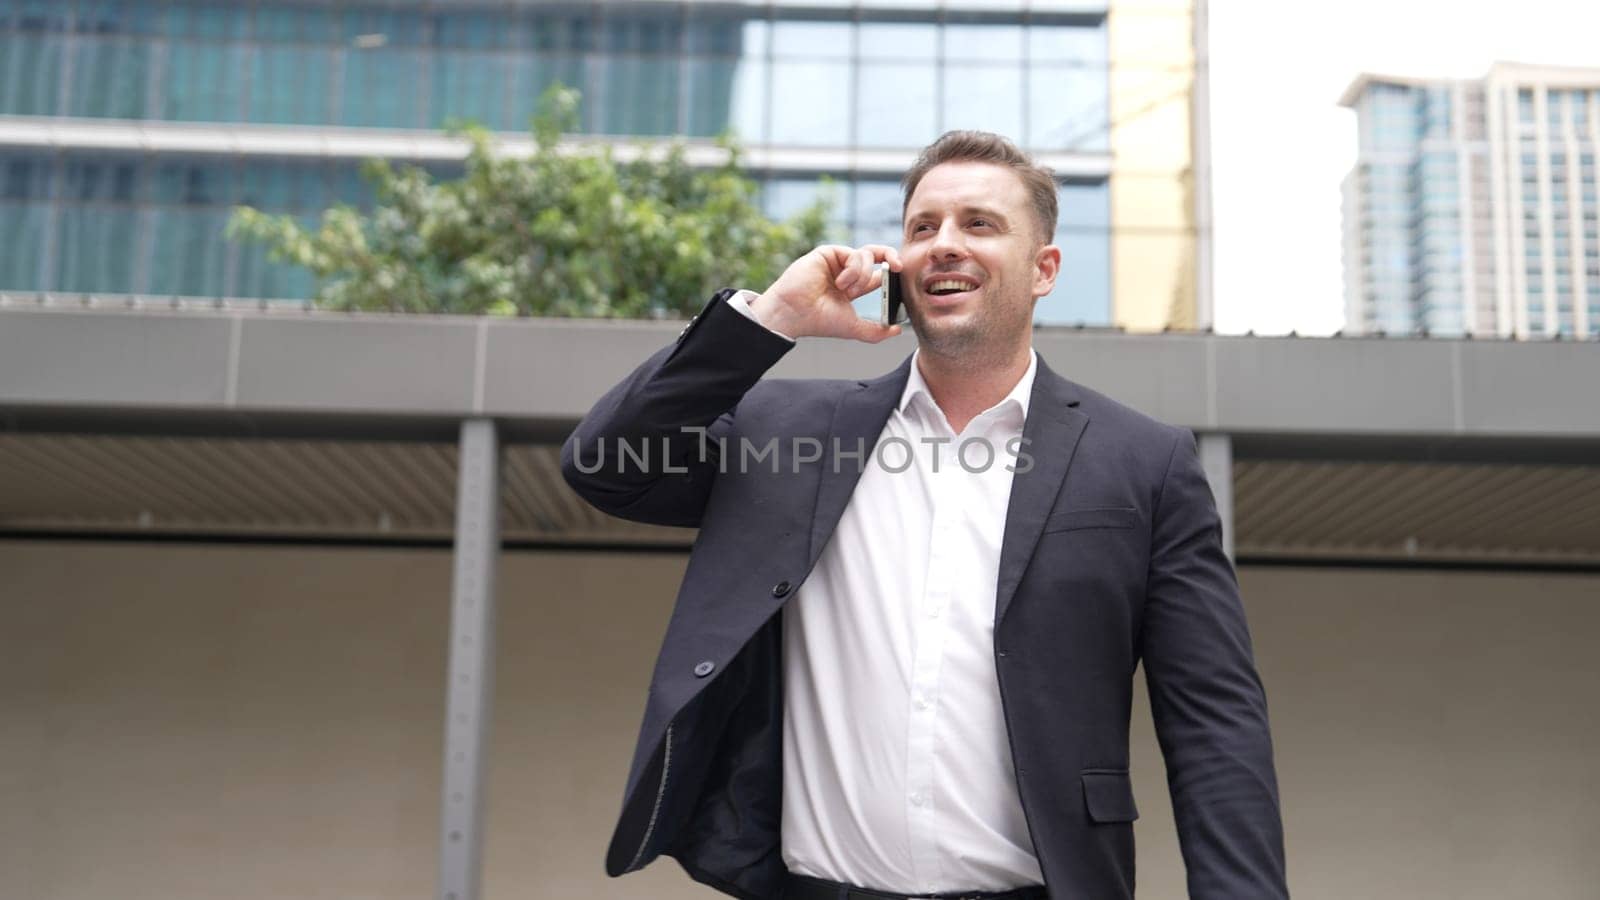 Skilled businessman calling his colleague to plan financial strategy while walking to workplace. Project manager using mobile phone to communicate with team while talking to phone. Lifestyle. Urbane.